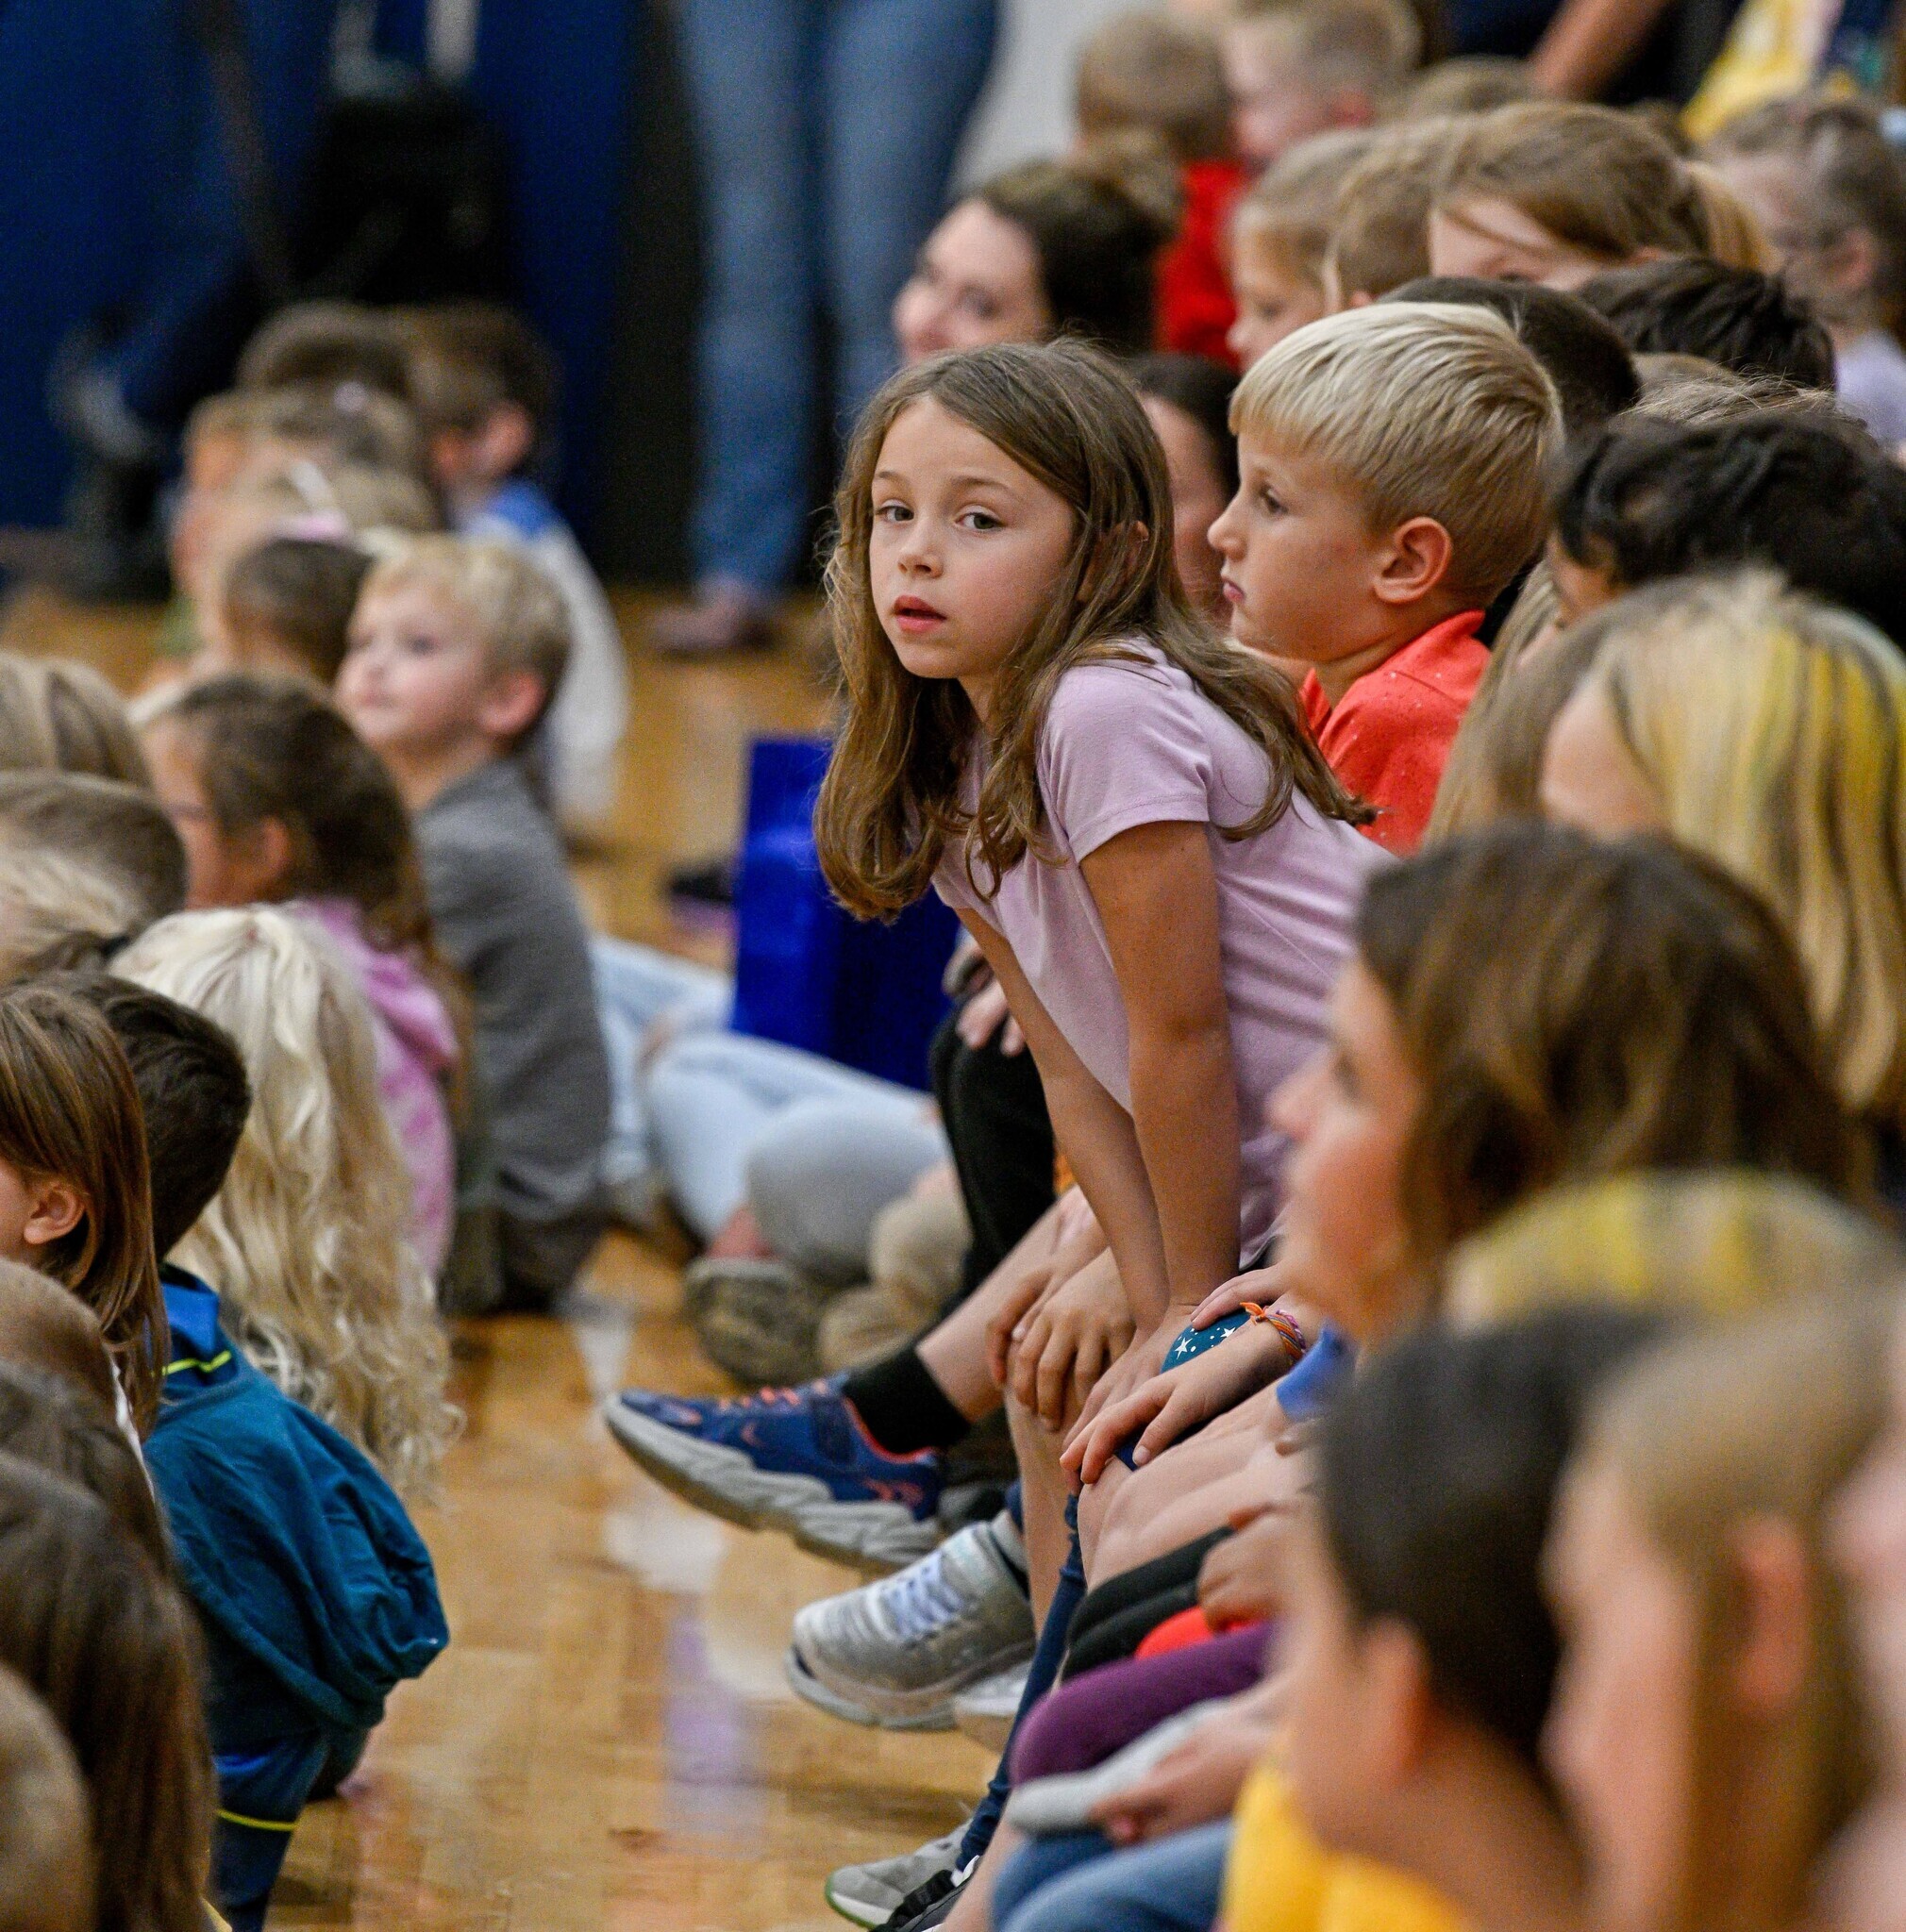 Elementary students at assembly